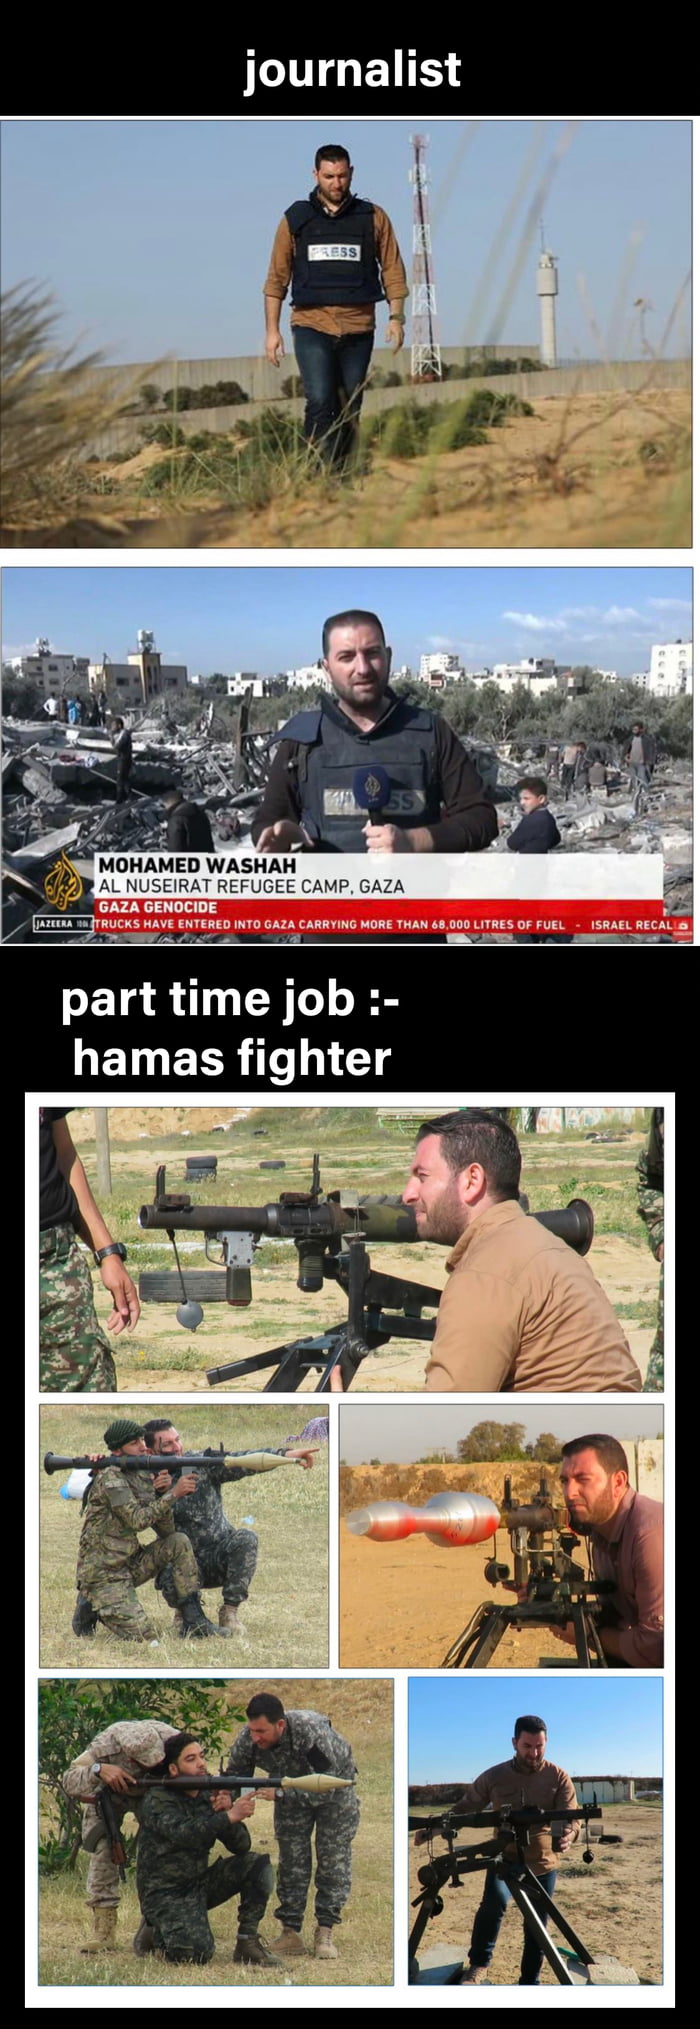 When they lied to us " iSrAeL TaRgEtS JoUrNaLiStS" they did 